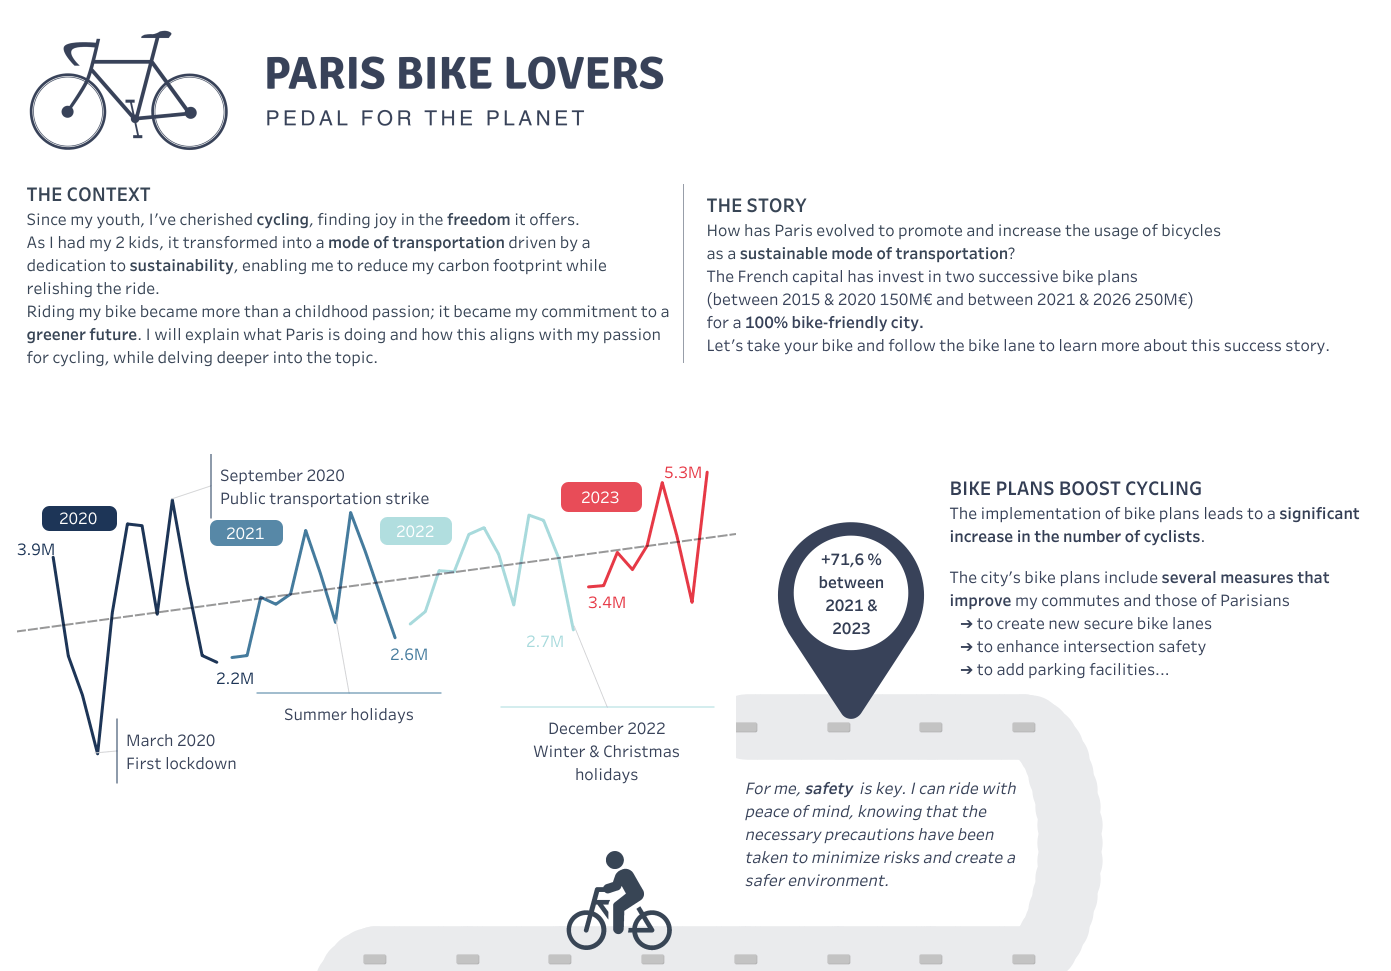 Visualization of how Paris has promoted and increased bike usage